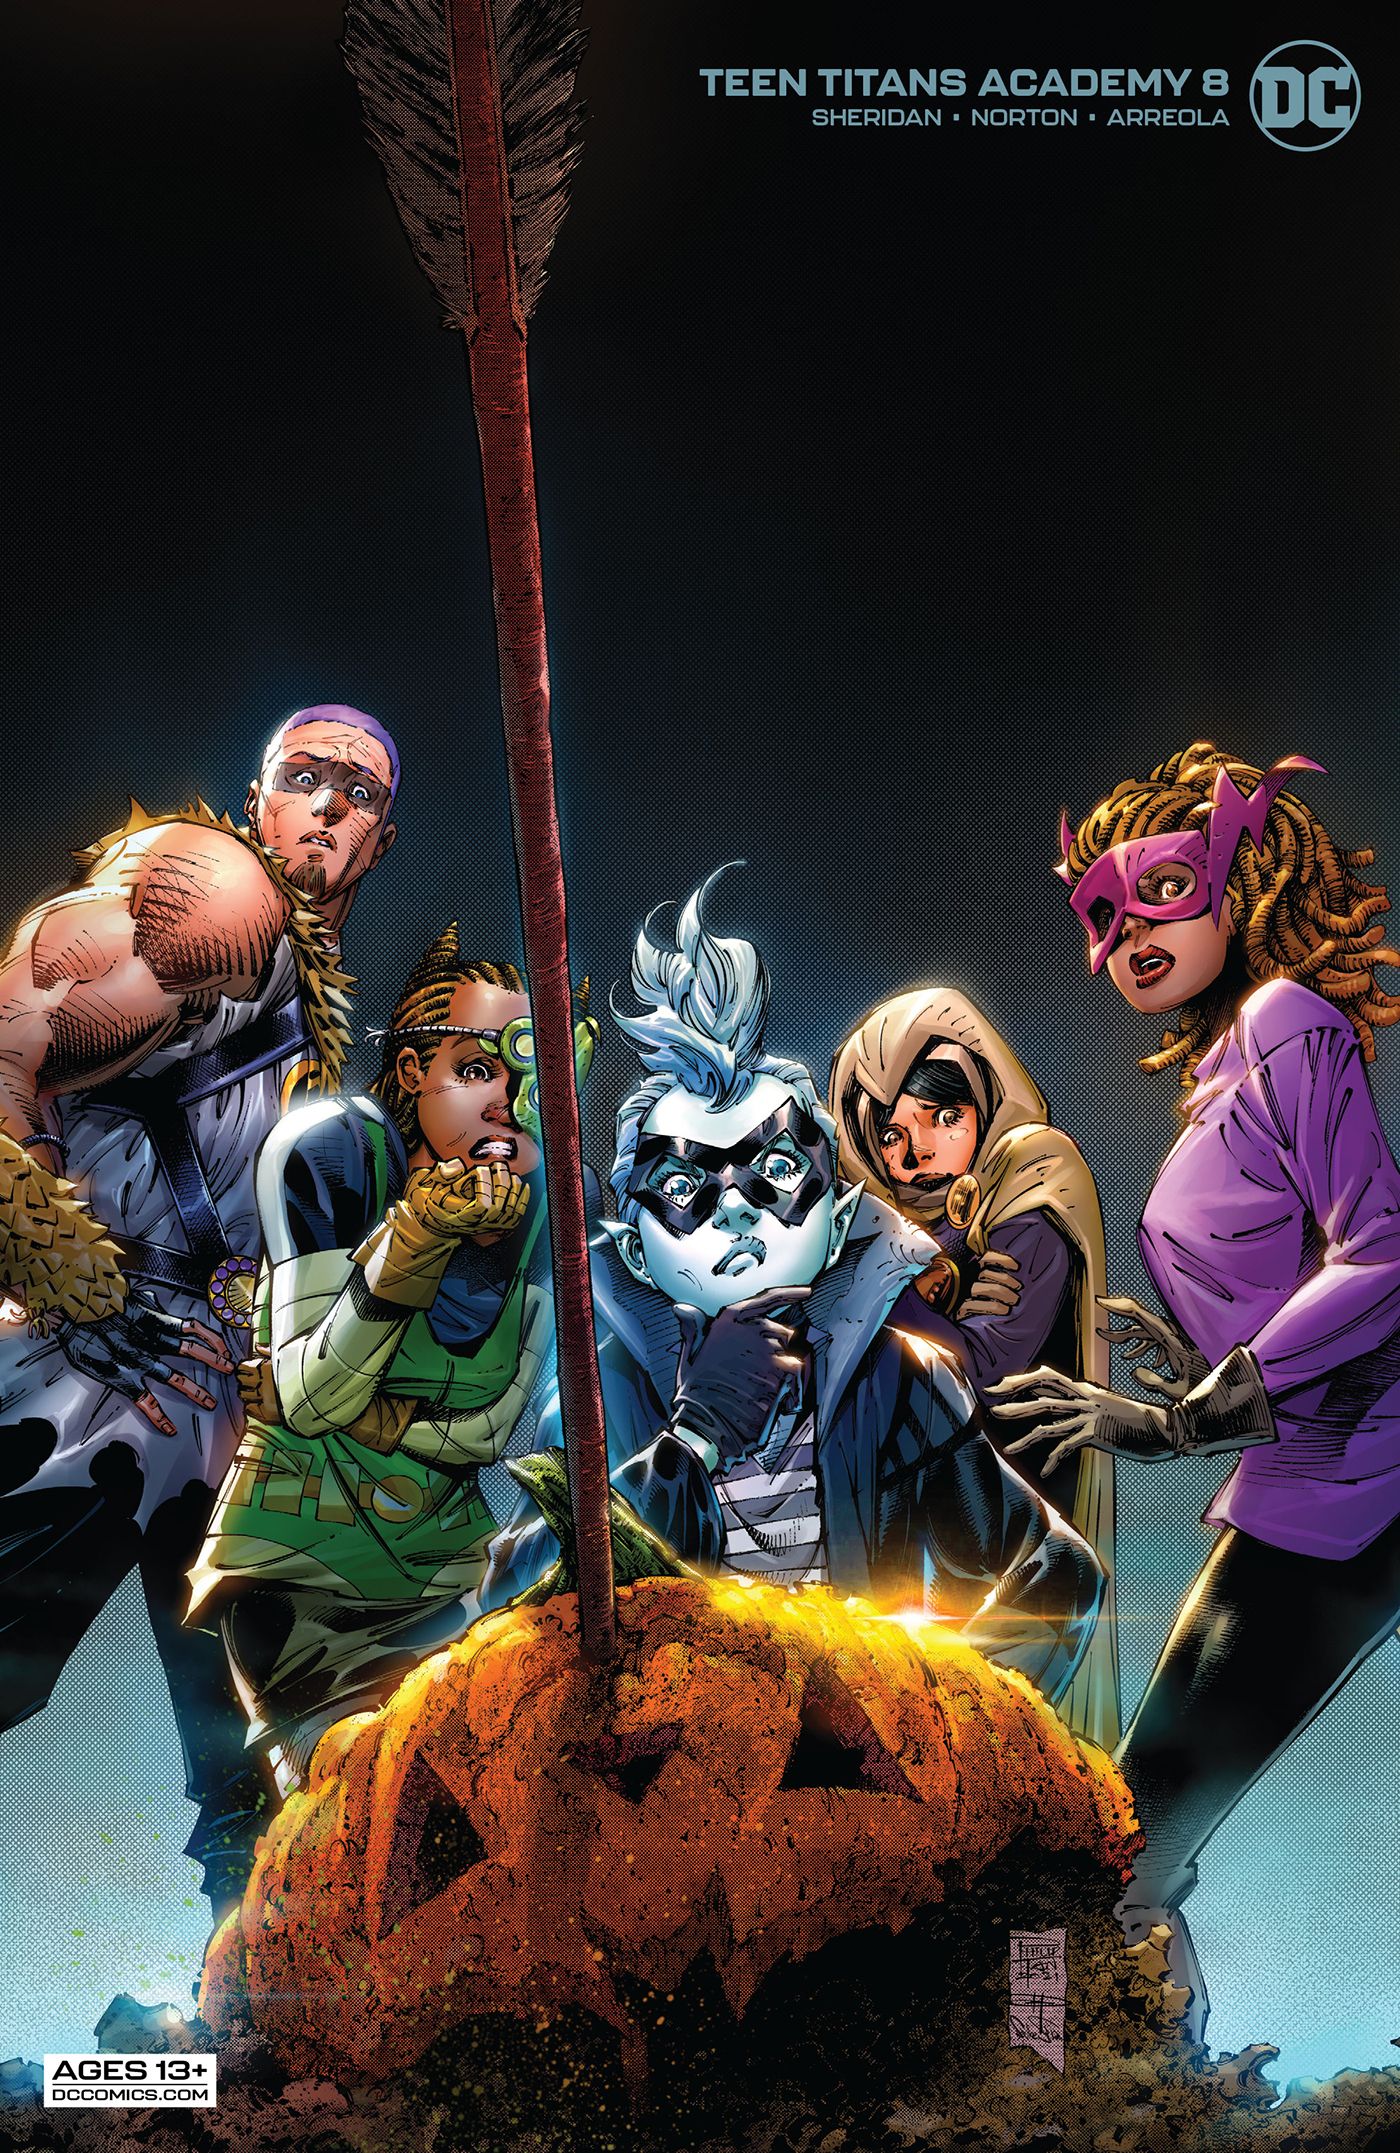 A variant cover for Teen Titans Academy #8 shows off the students' Halloween costumes.